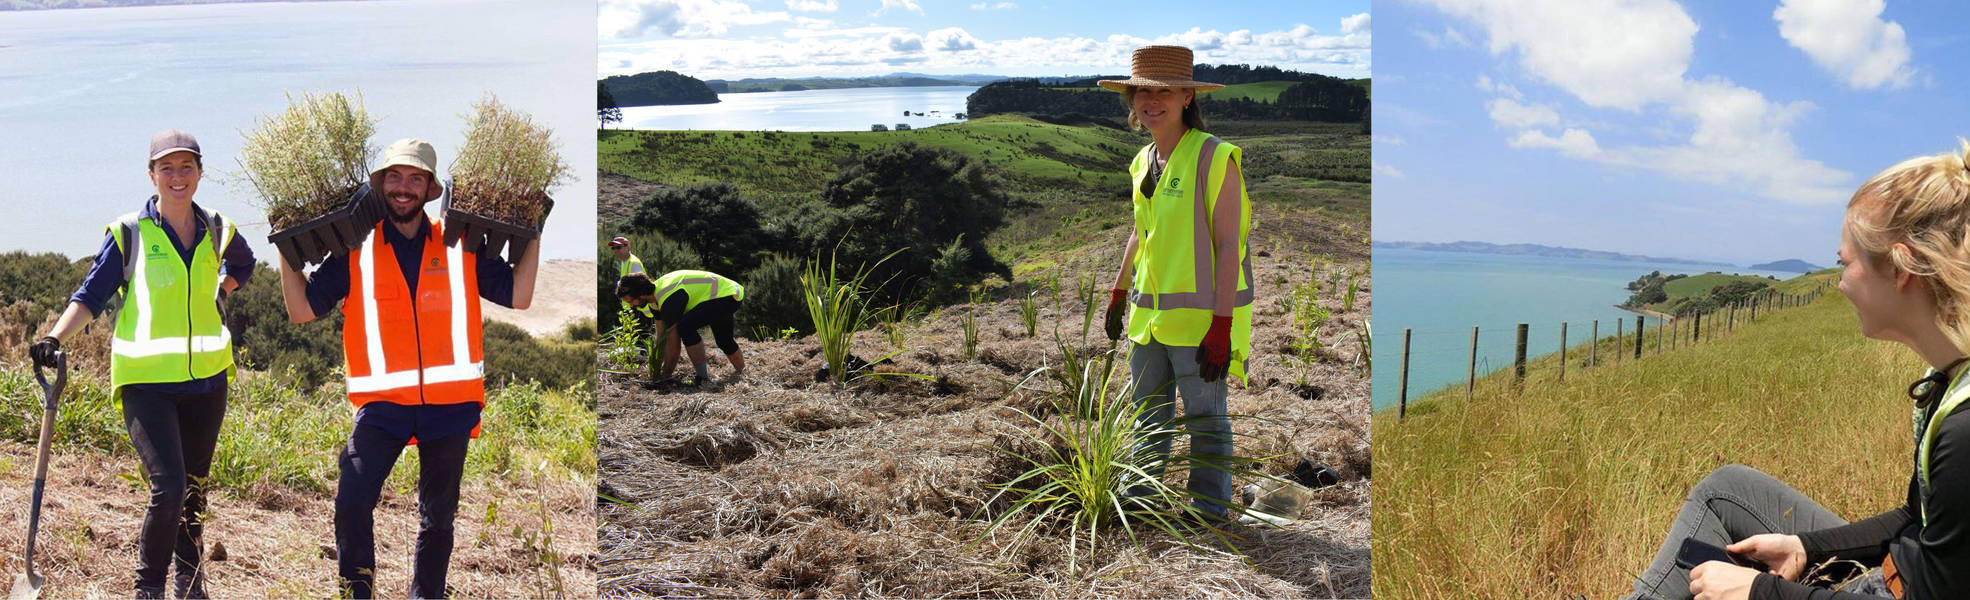 Conservation of wildlife in Auckland